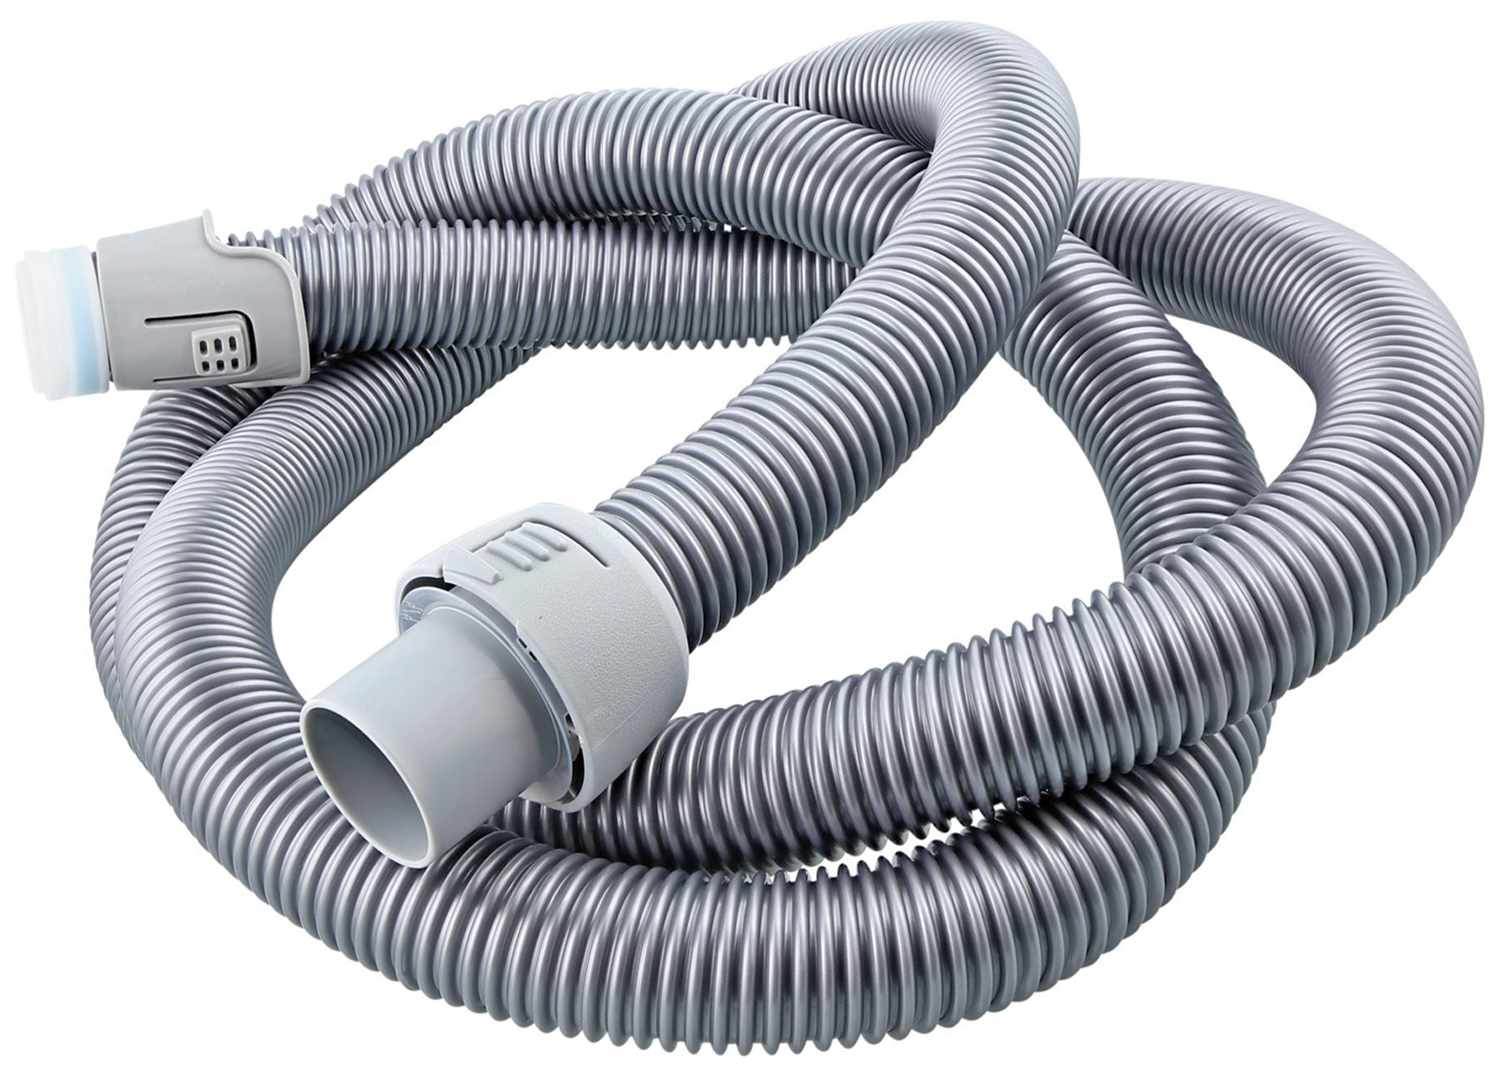 32mm Hose for Vacuum Cleaner Electrolux ZCX6206 Cyclone XL 